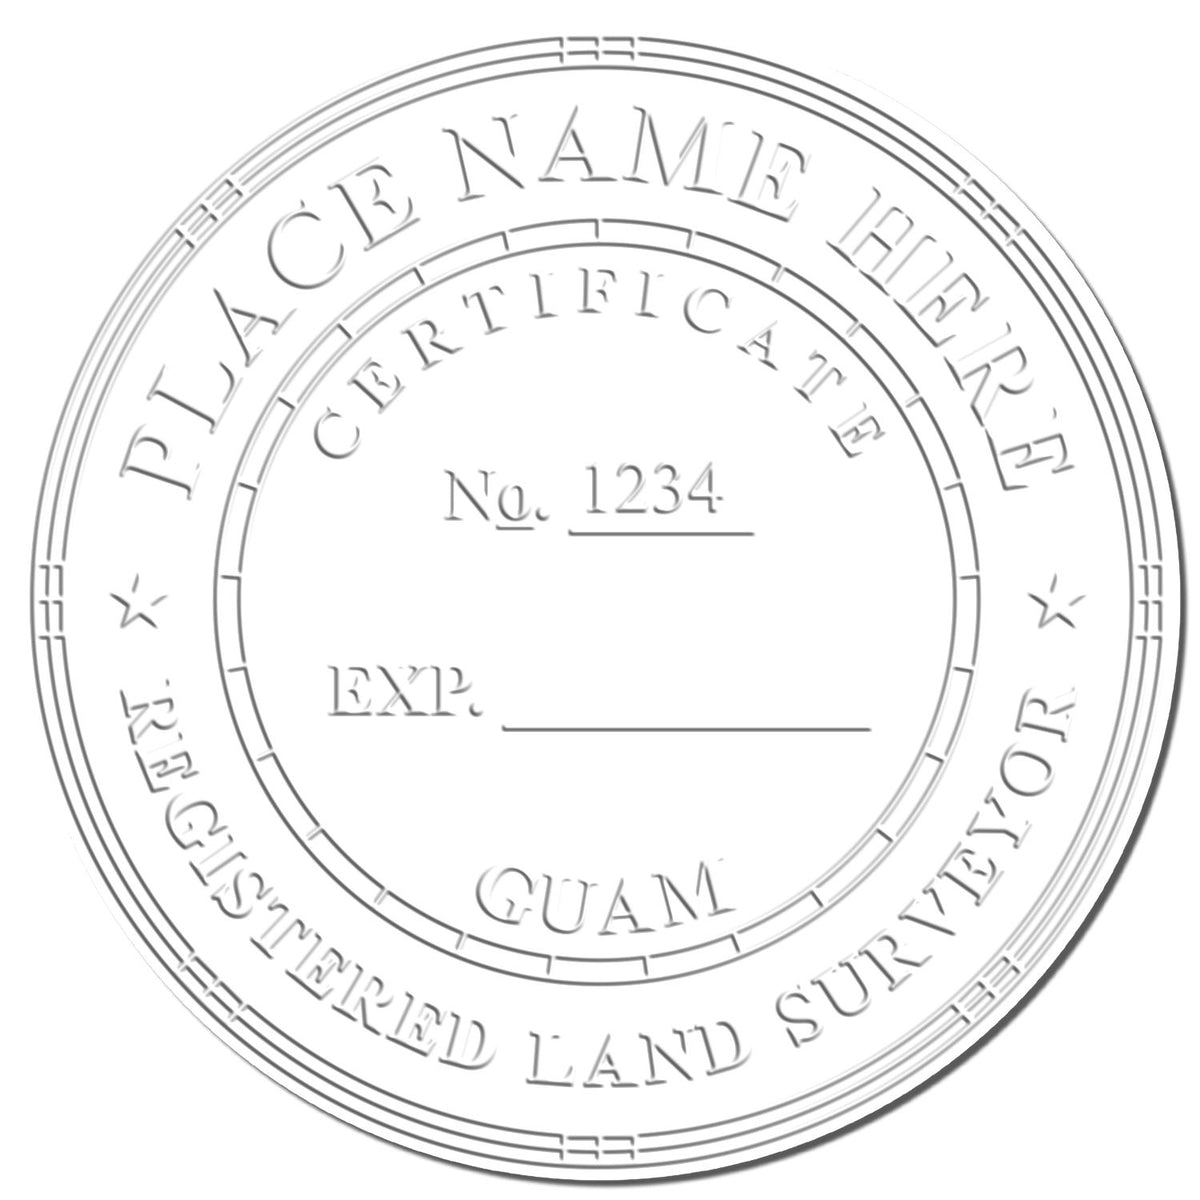 This paper is stamped with a sample imprint of the Long Reach Guam Land Surveyor Seal, signifying its quality and reliability.